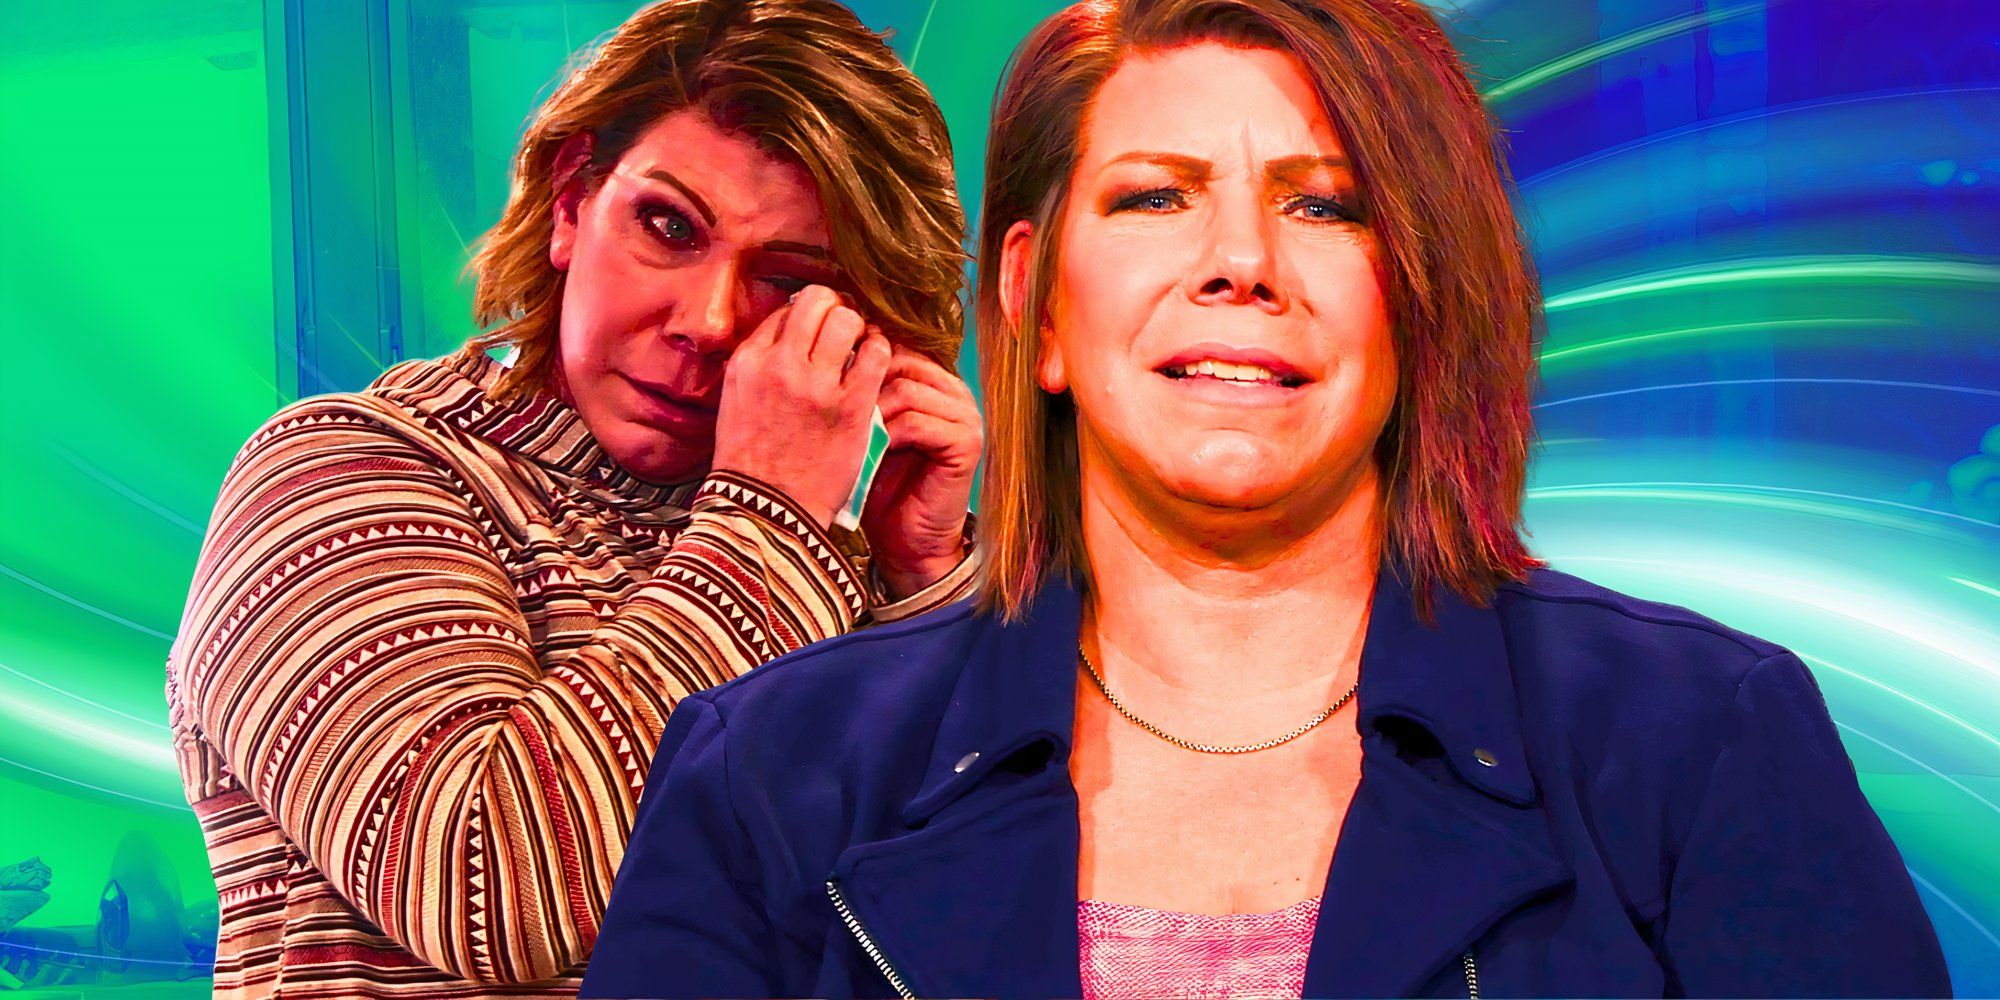 meri brown from sisters wives in crying montage with two poses of her sobbing and a green and blue background